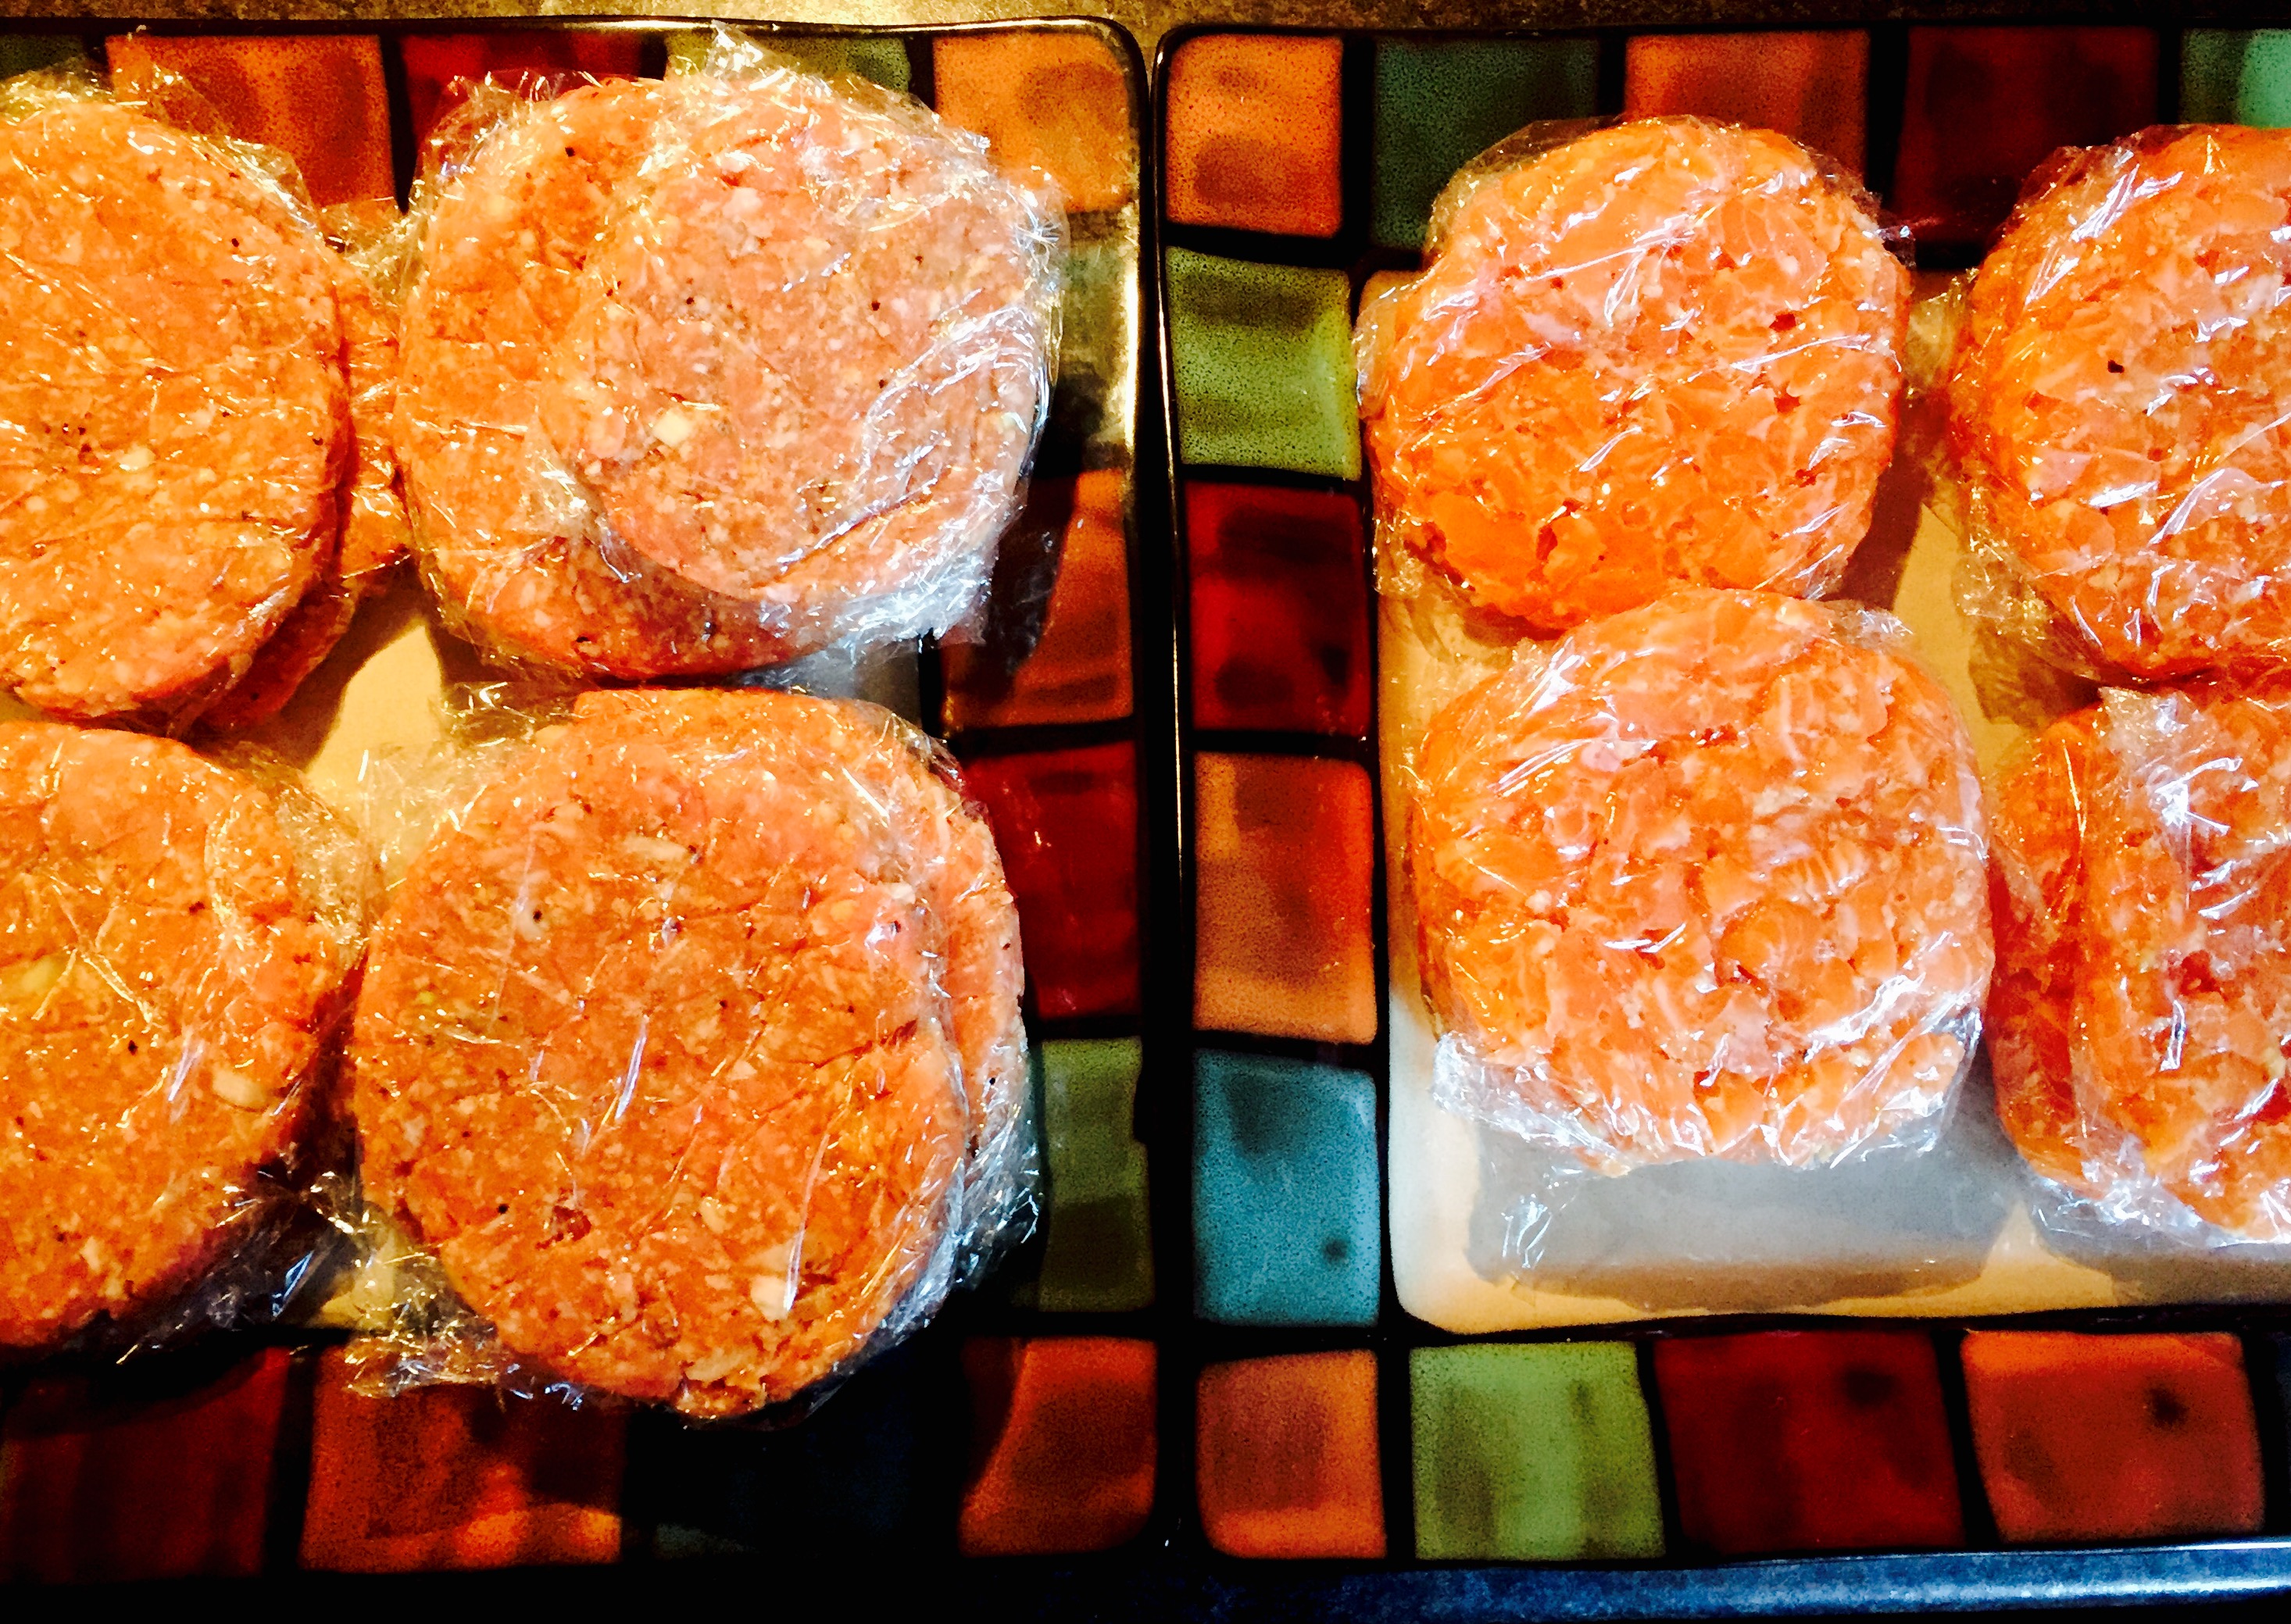 A fresh batch of homemade burgers ready for the deep freeze, pork on the left, salmon on the right